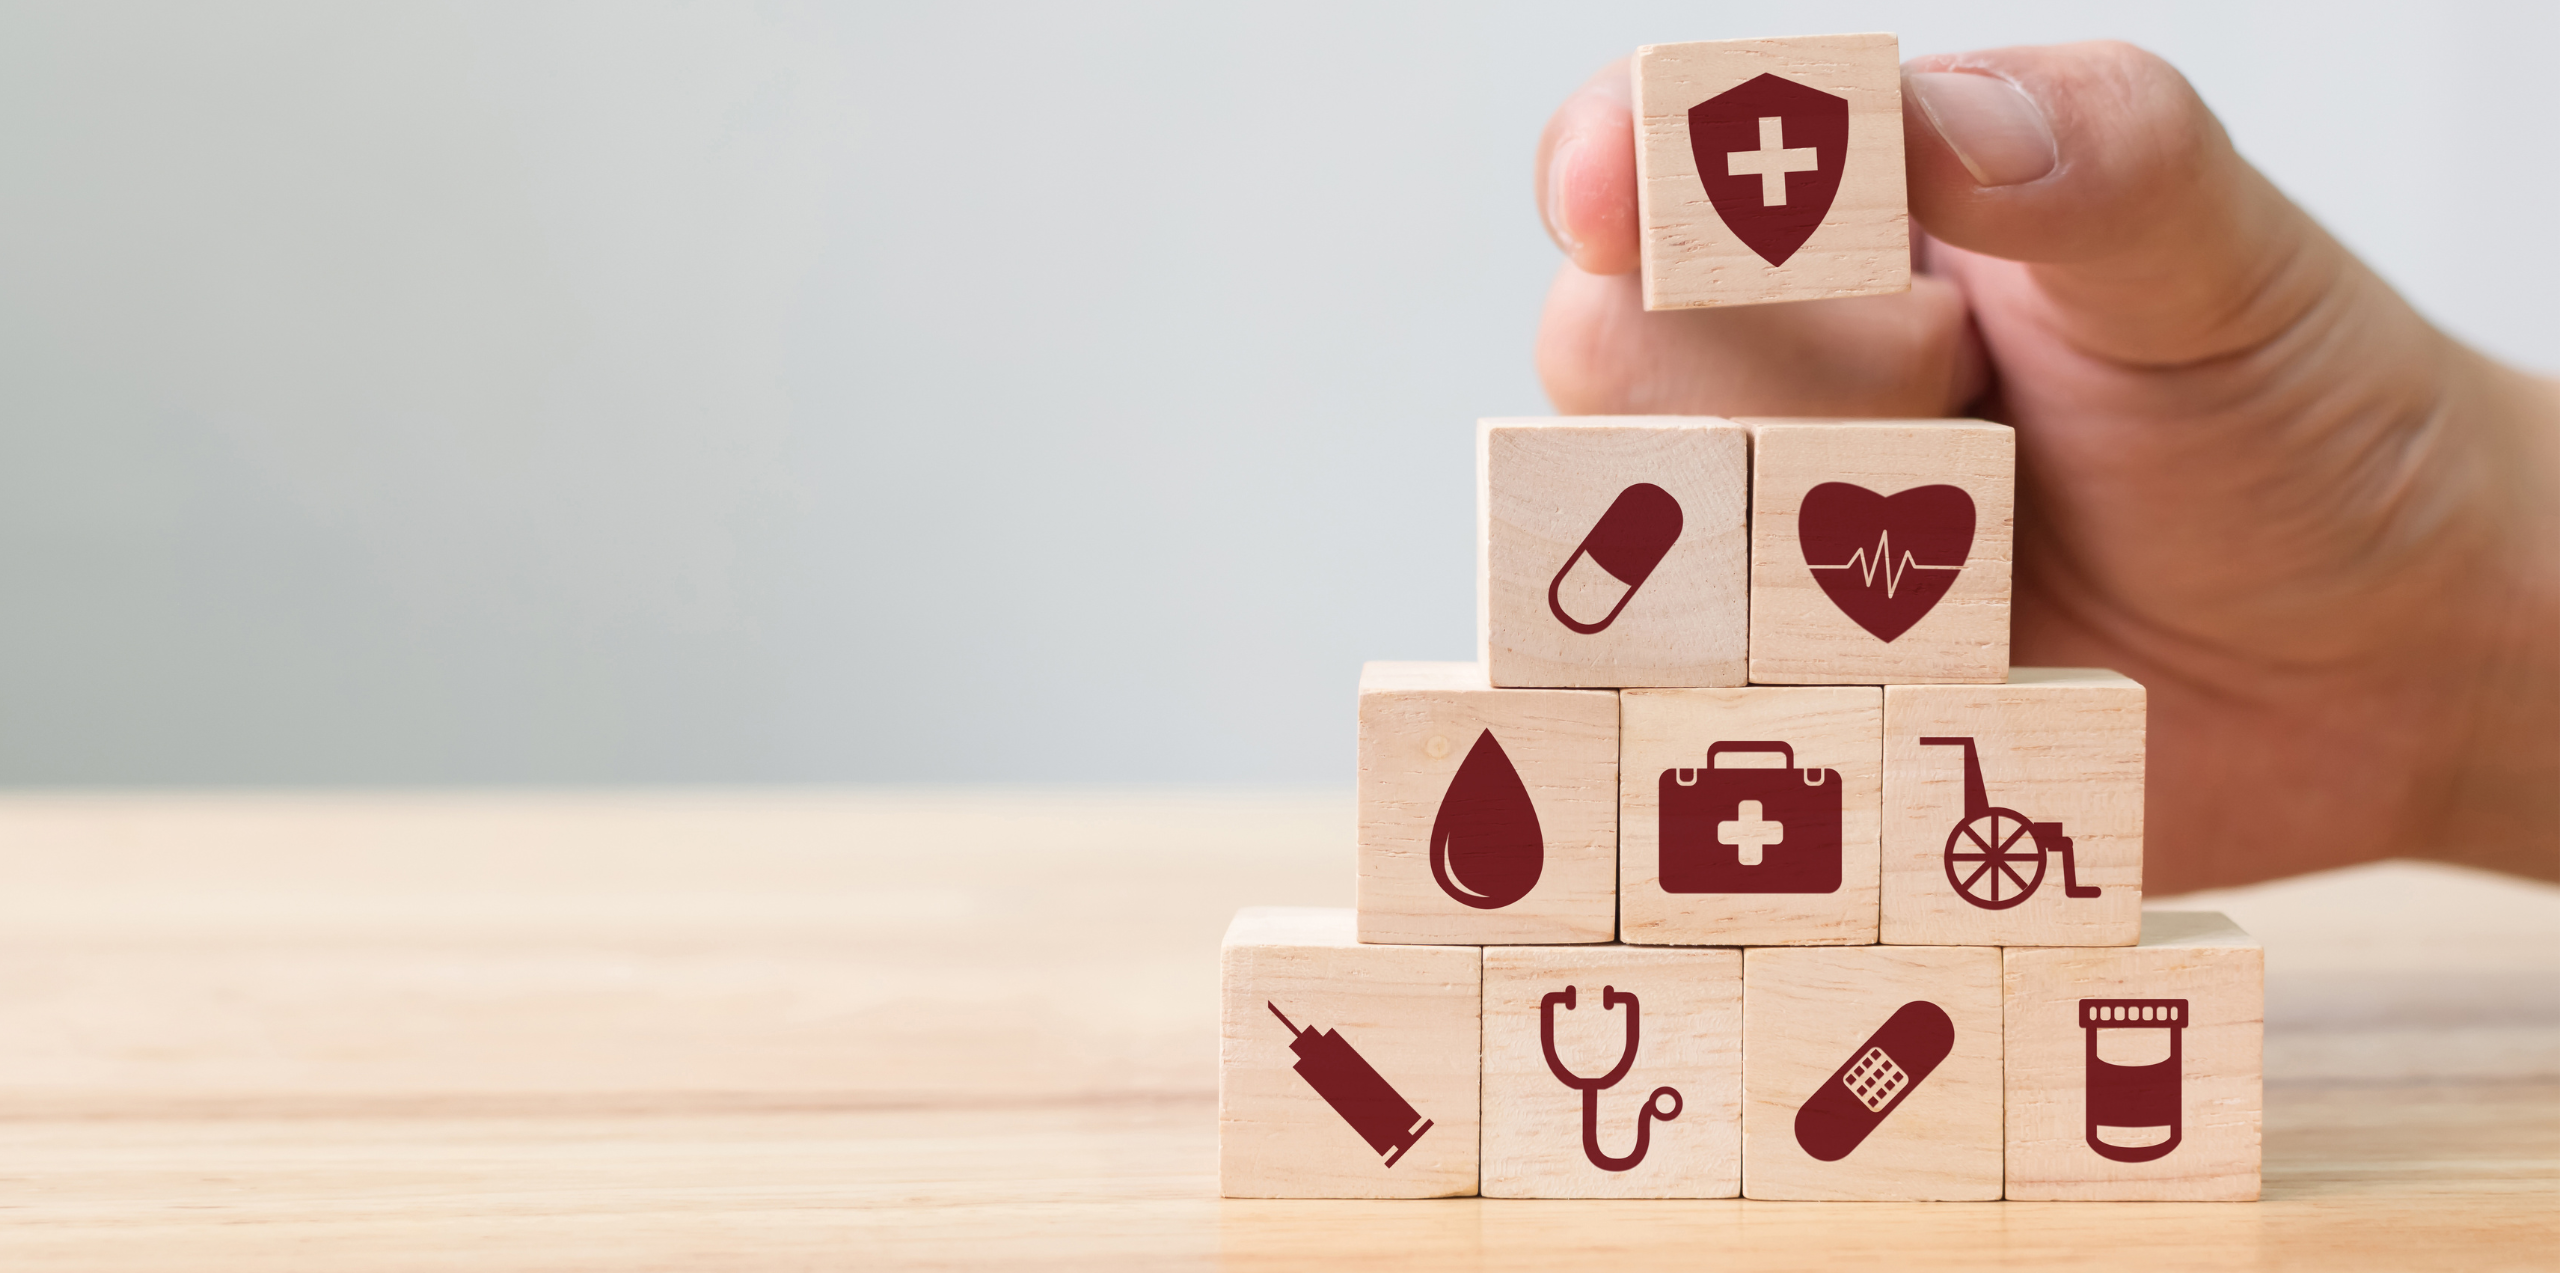 A hand places a final wooden block atop a pyramid of blocks depicting various icons of health and medicine.